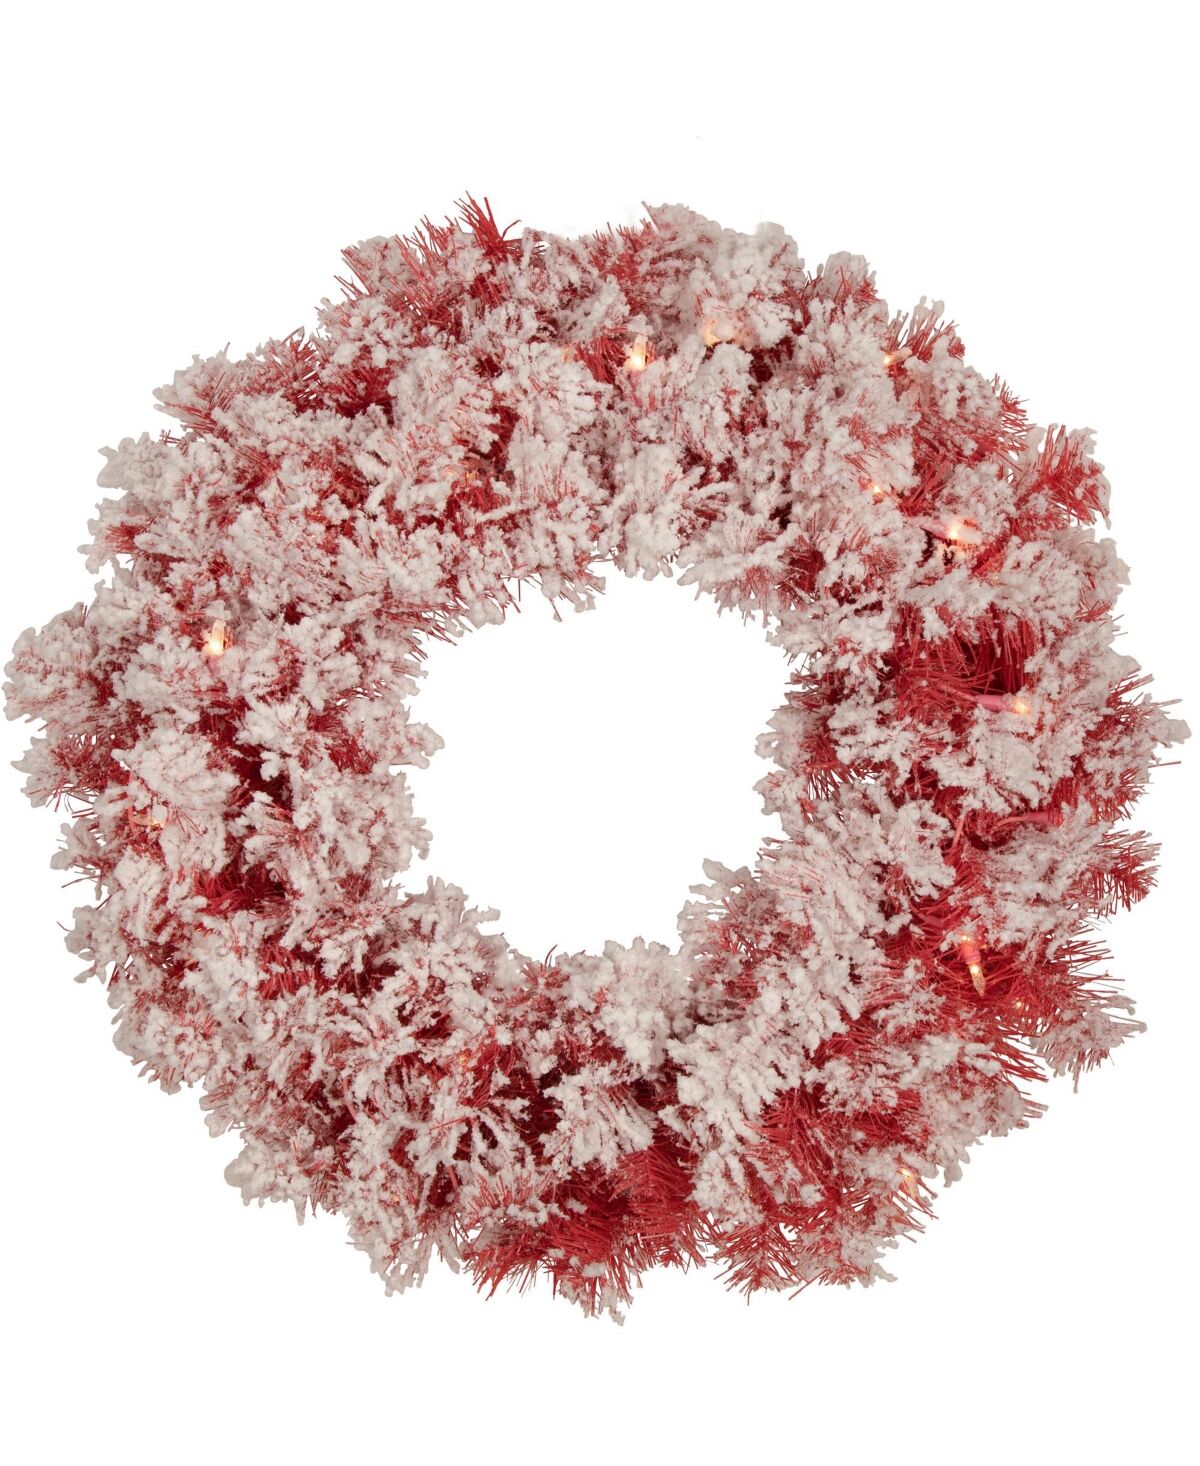 Northlight Pre- Lit Flocked Artificial Christmas Wreath With Clear Lights, 24